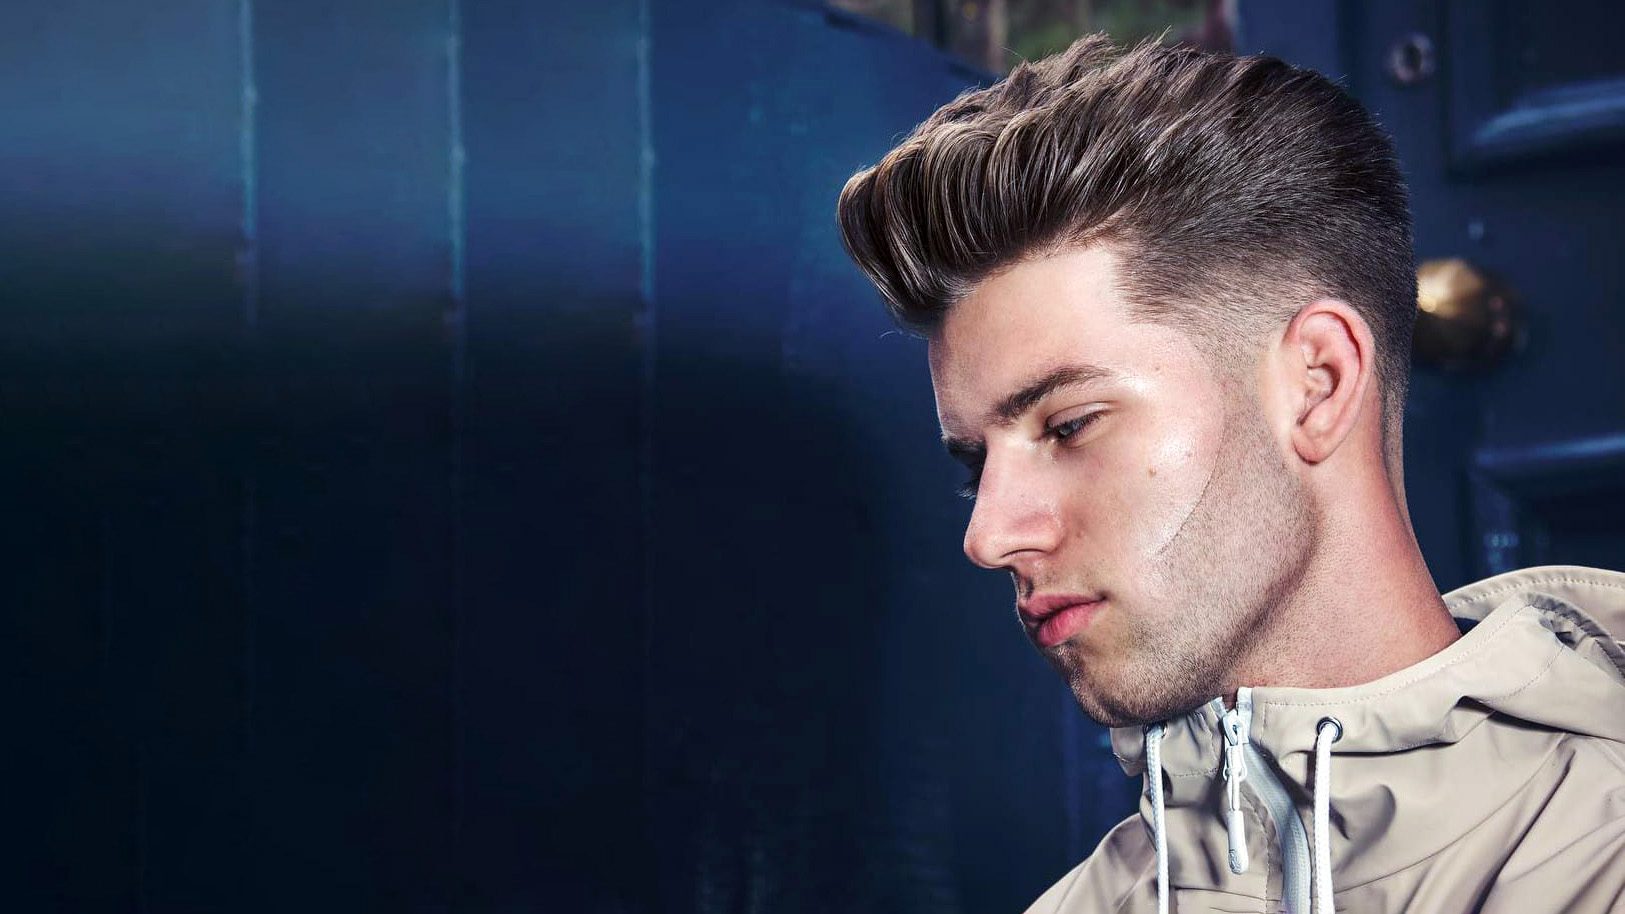 30 mens high fade hairstyle ideas to try in 2019 - Legit.ng